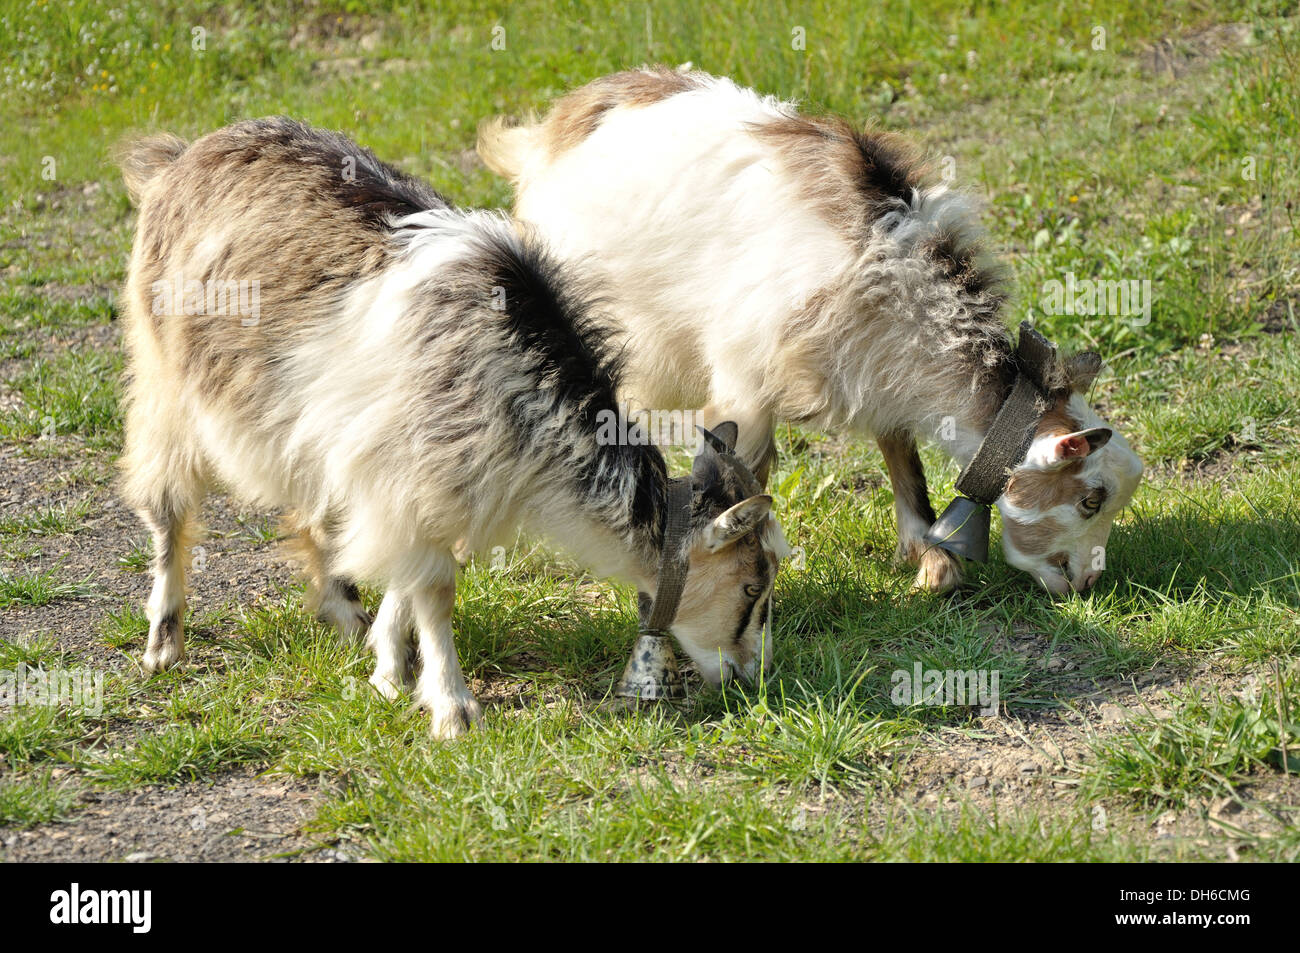 two white and brown goatling with a bells on the necks feeding Stock Photo